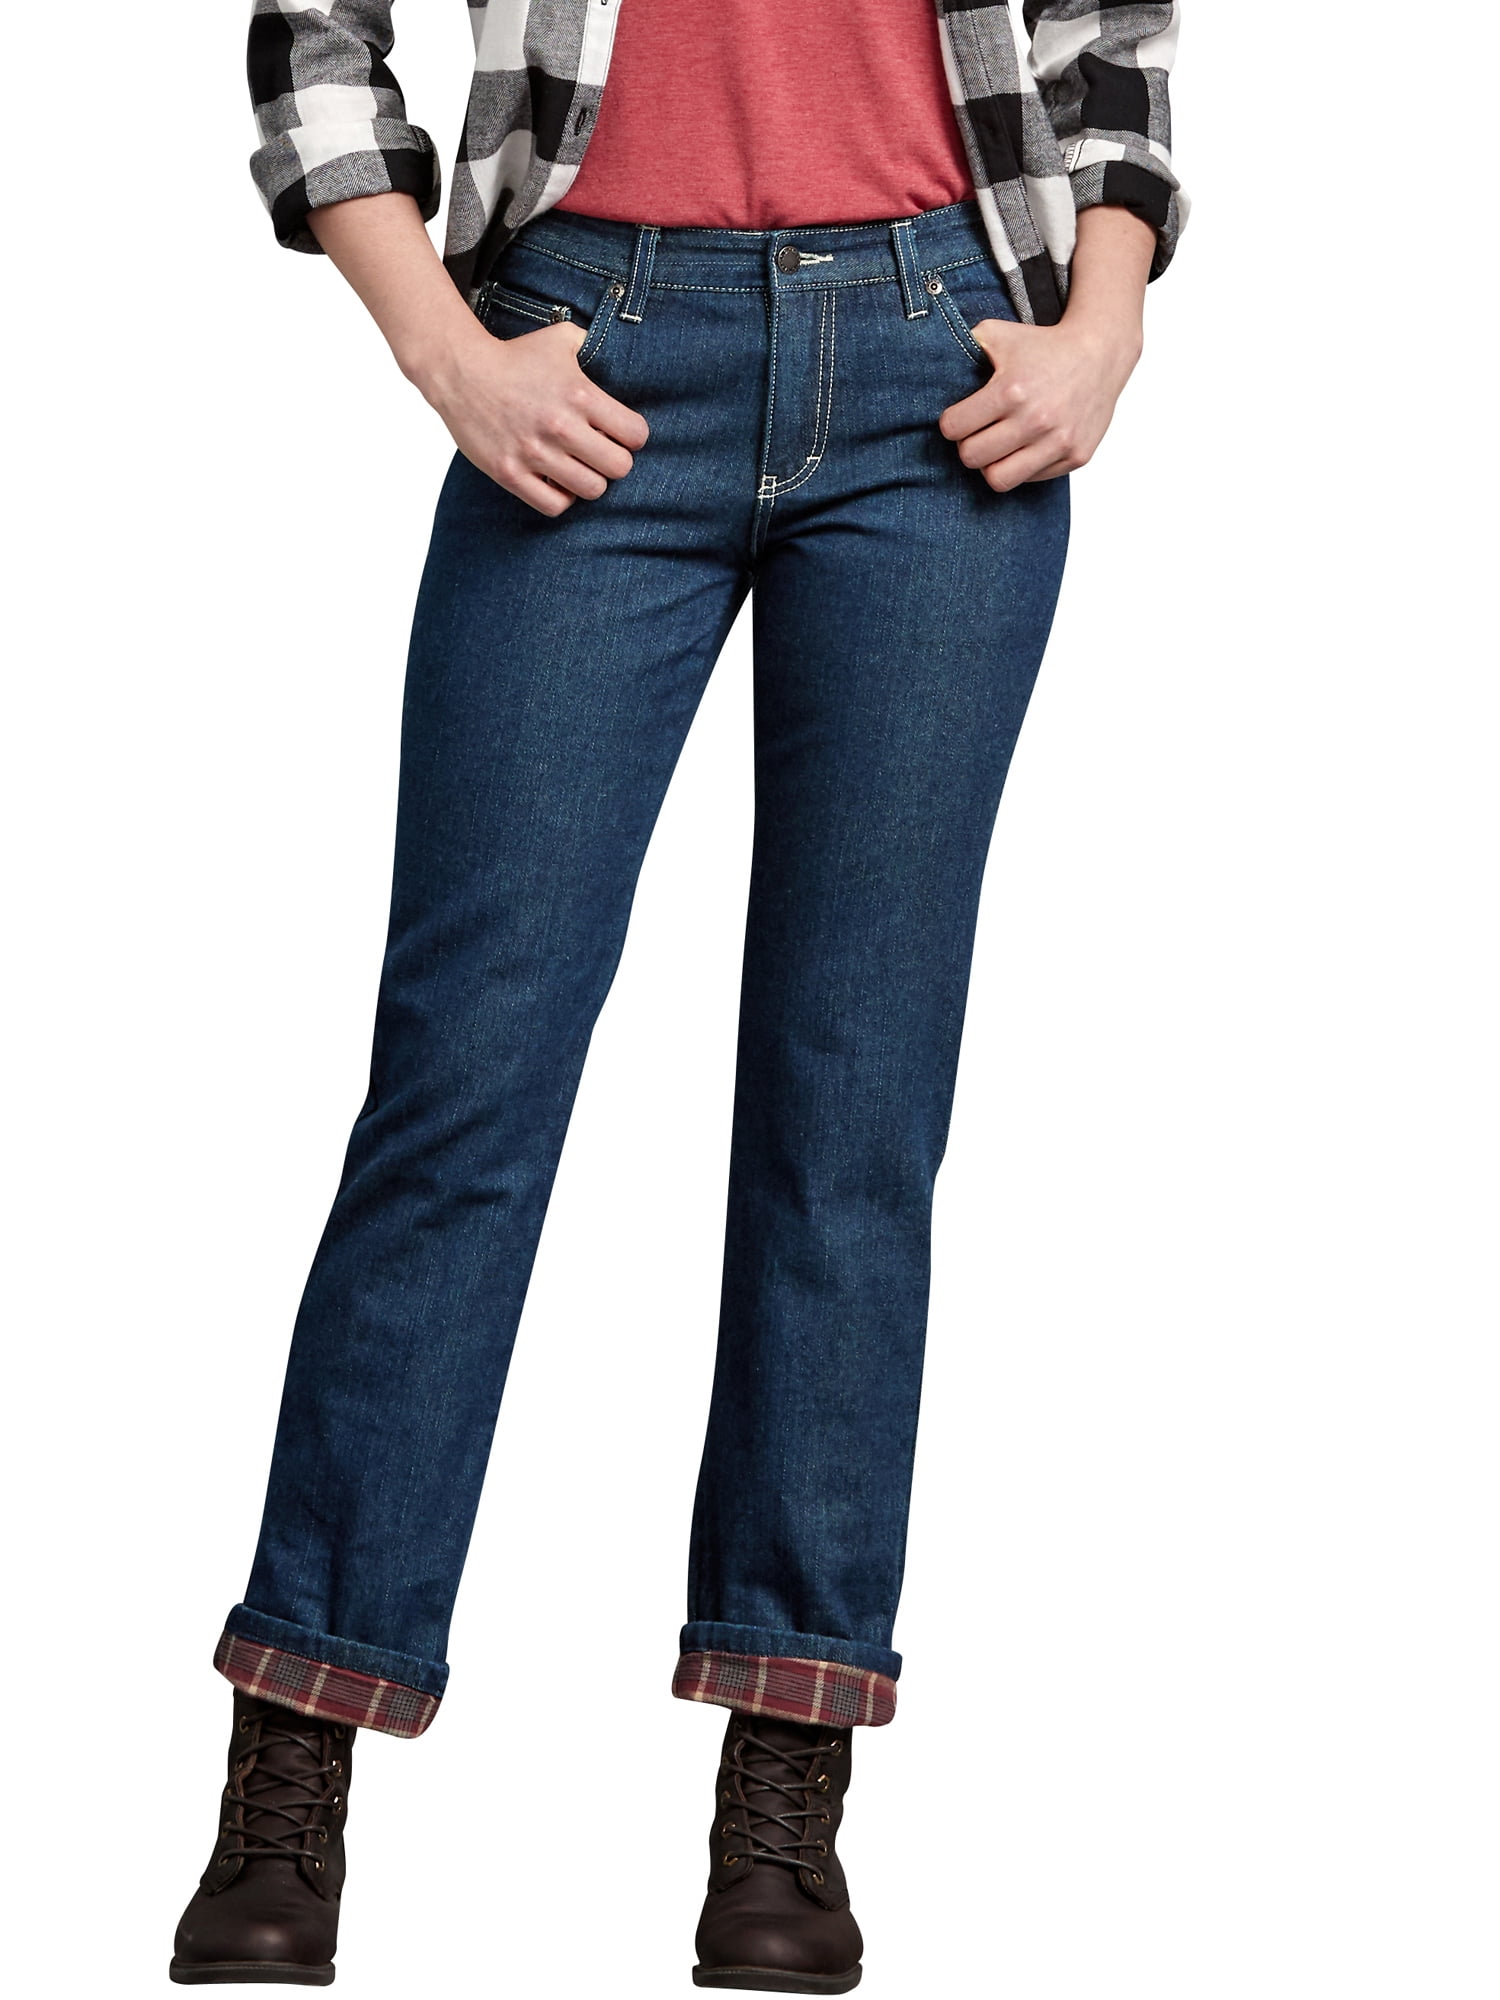 women's pull on flannel lined jeans